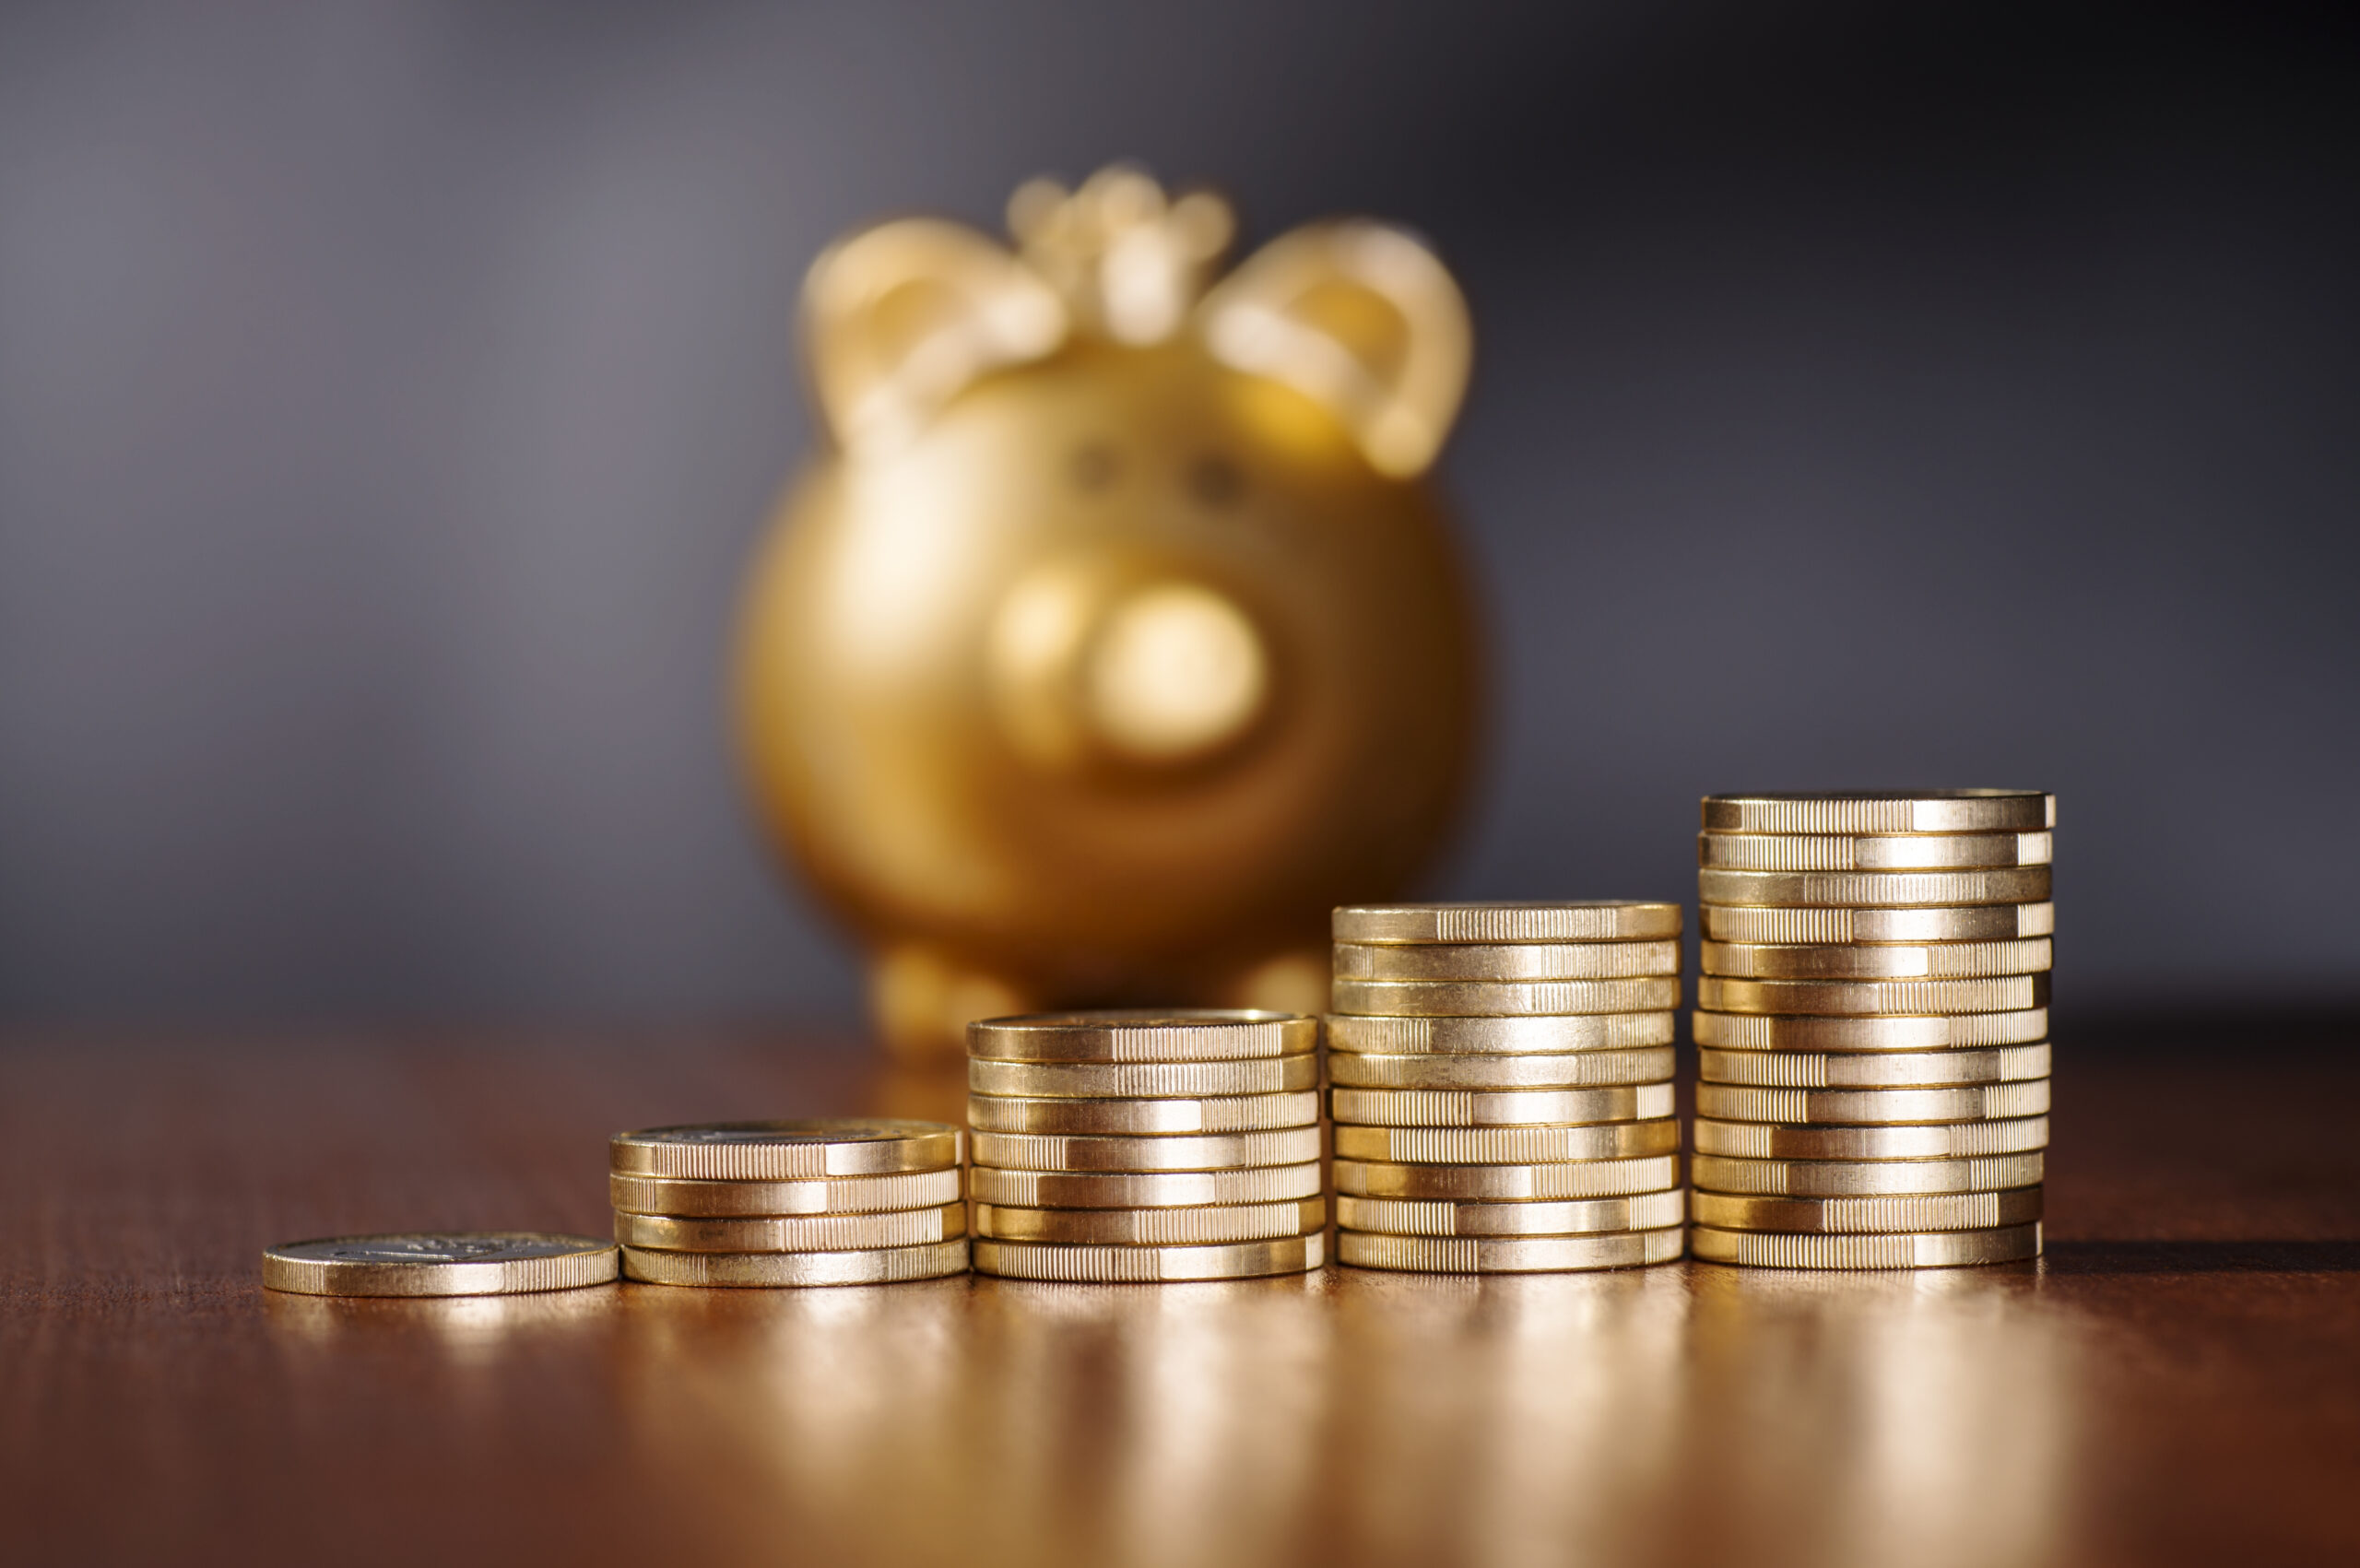 Gold stacks of coins and piggy bank related to Unity E-Gold Savings